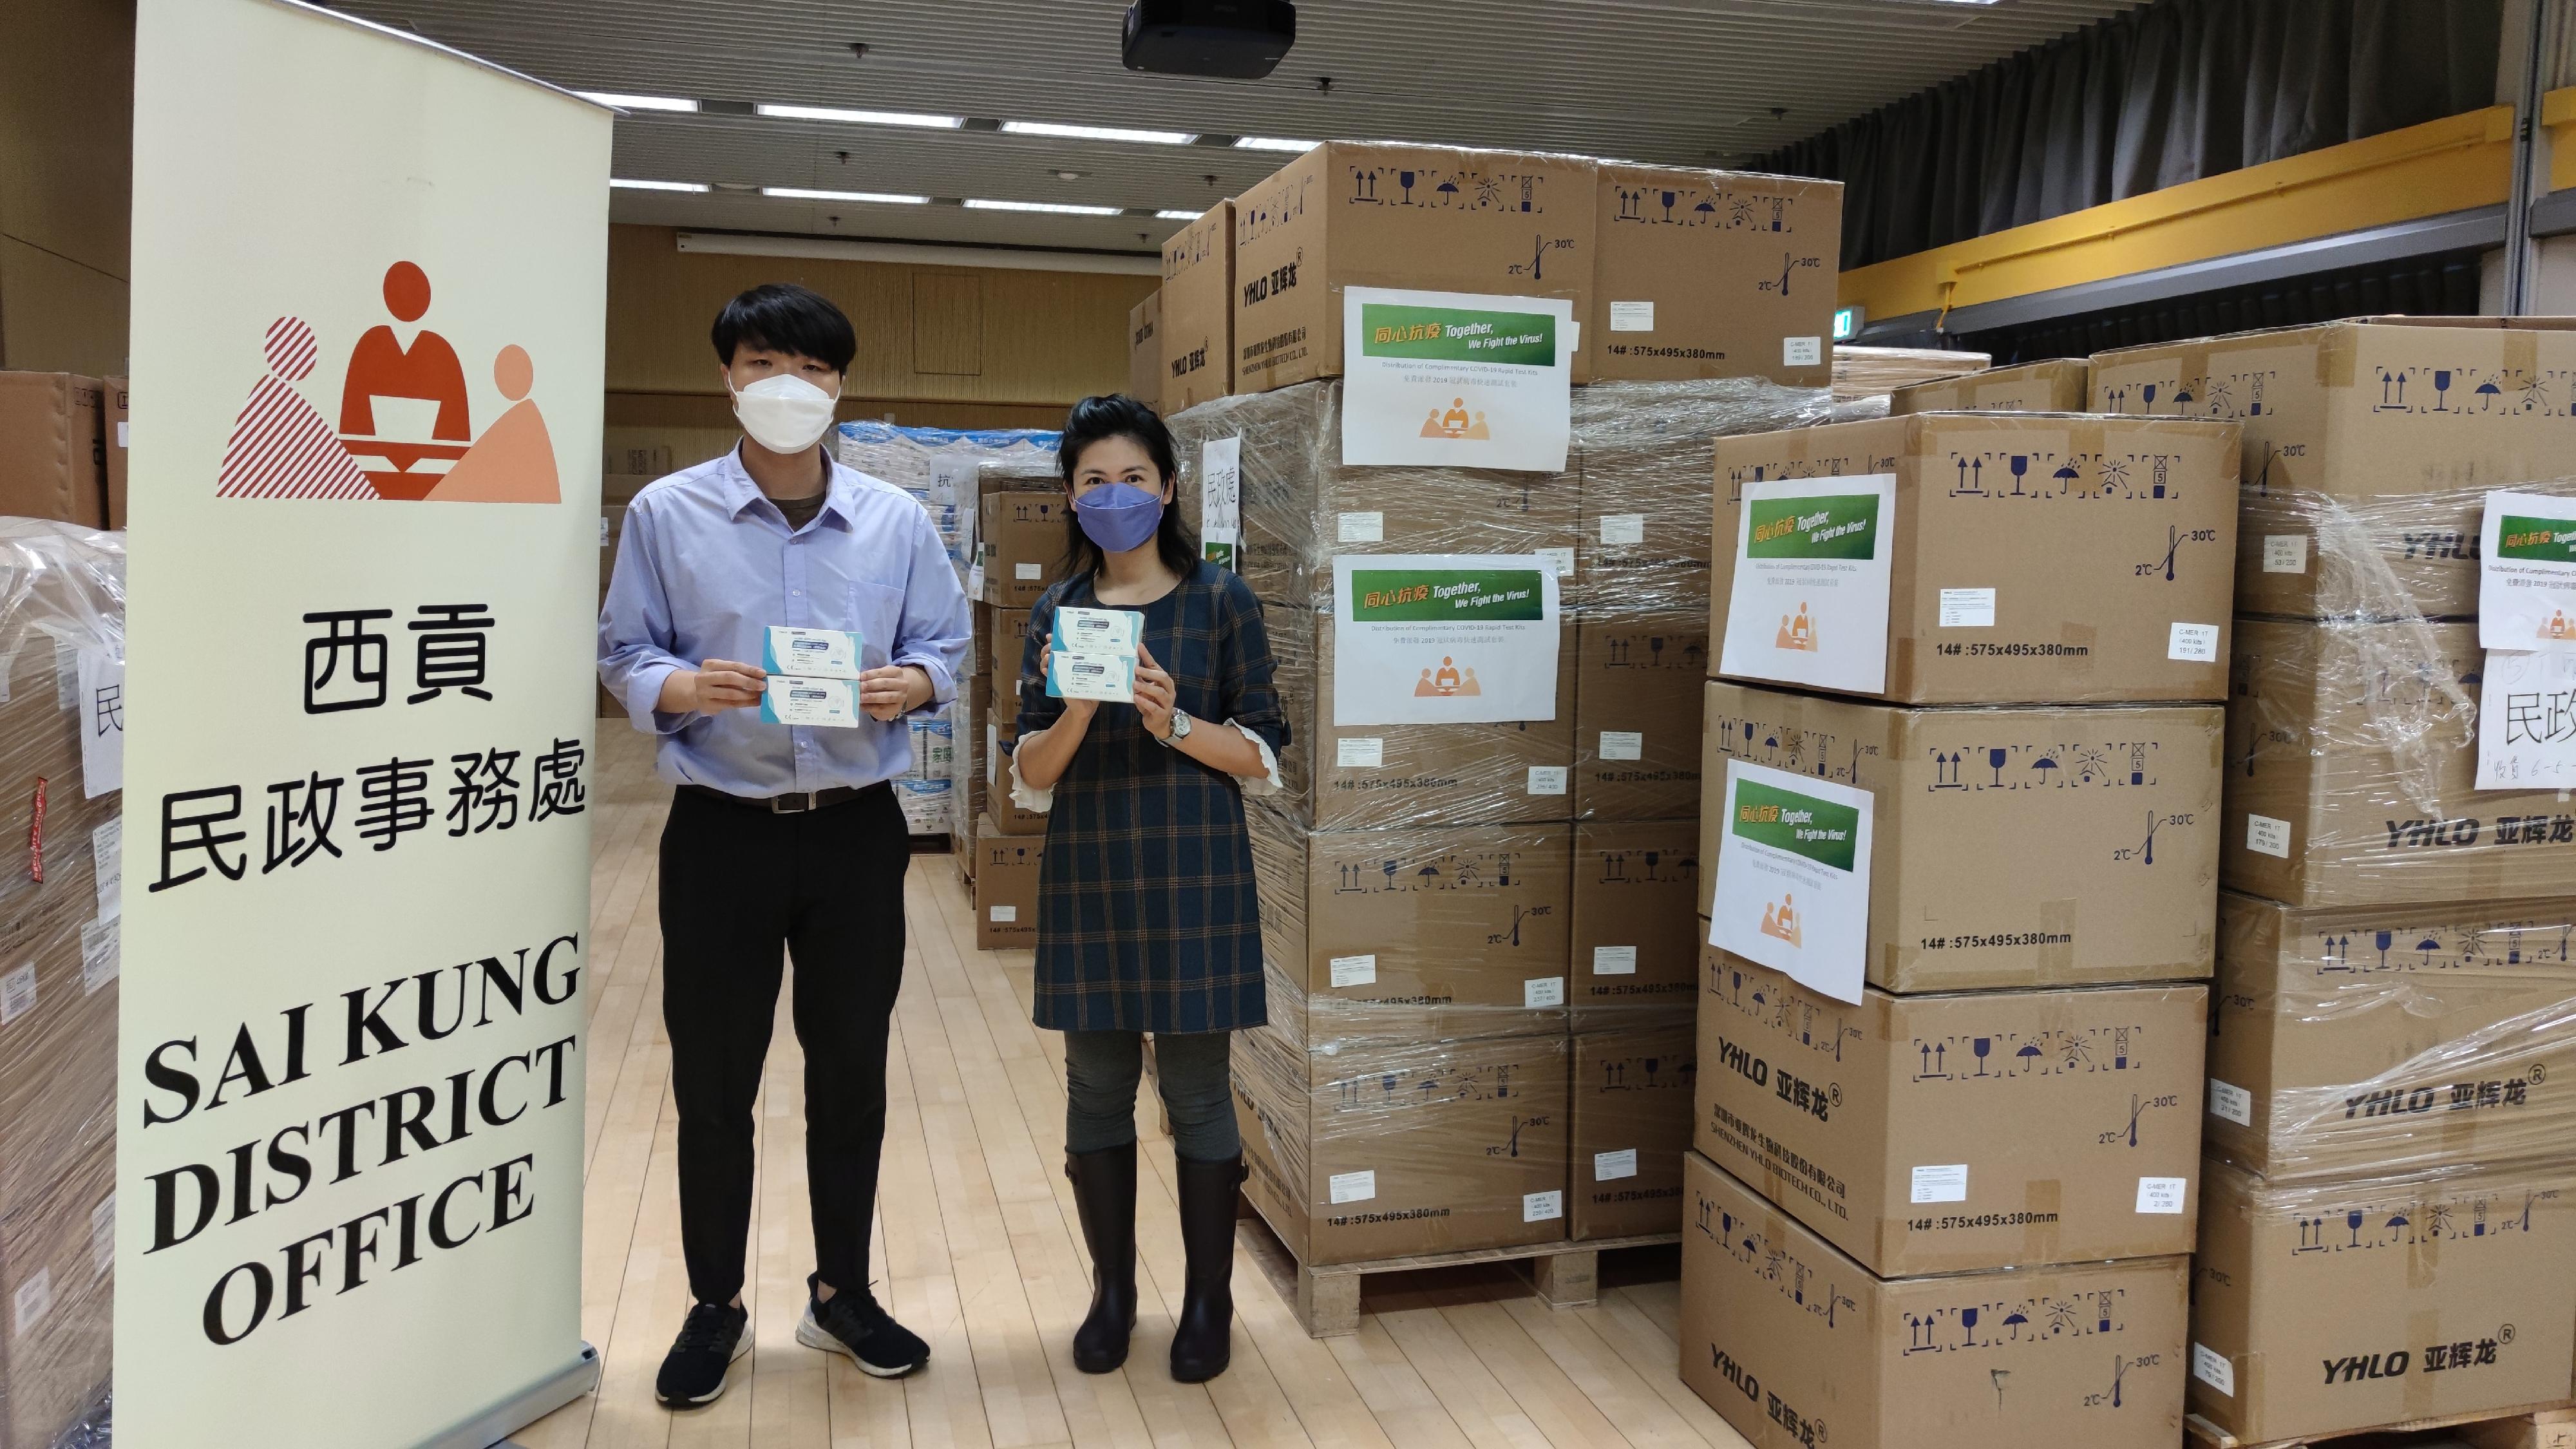 The Sai Kung District Office today (May 13) distributed COVID-19 rapid test kits to households, cleansing workers and property management staff living and working in Kwong Ming Court for voluntary testing through the property management company.